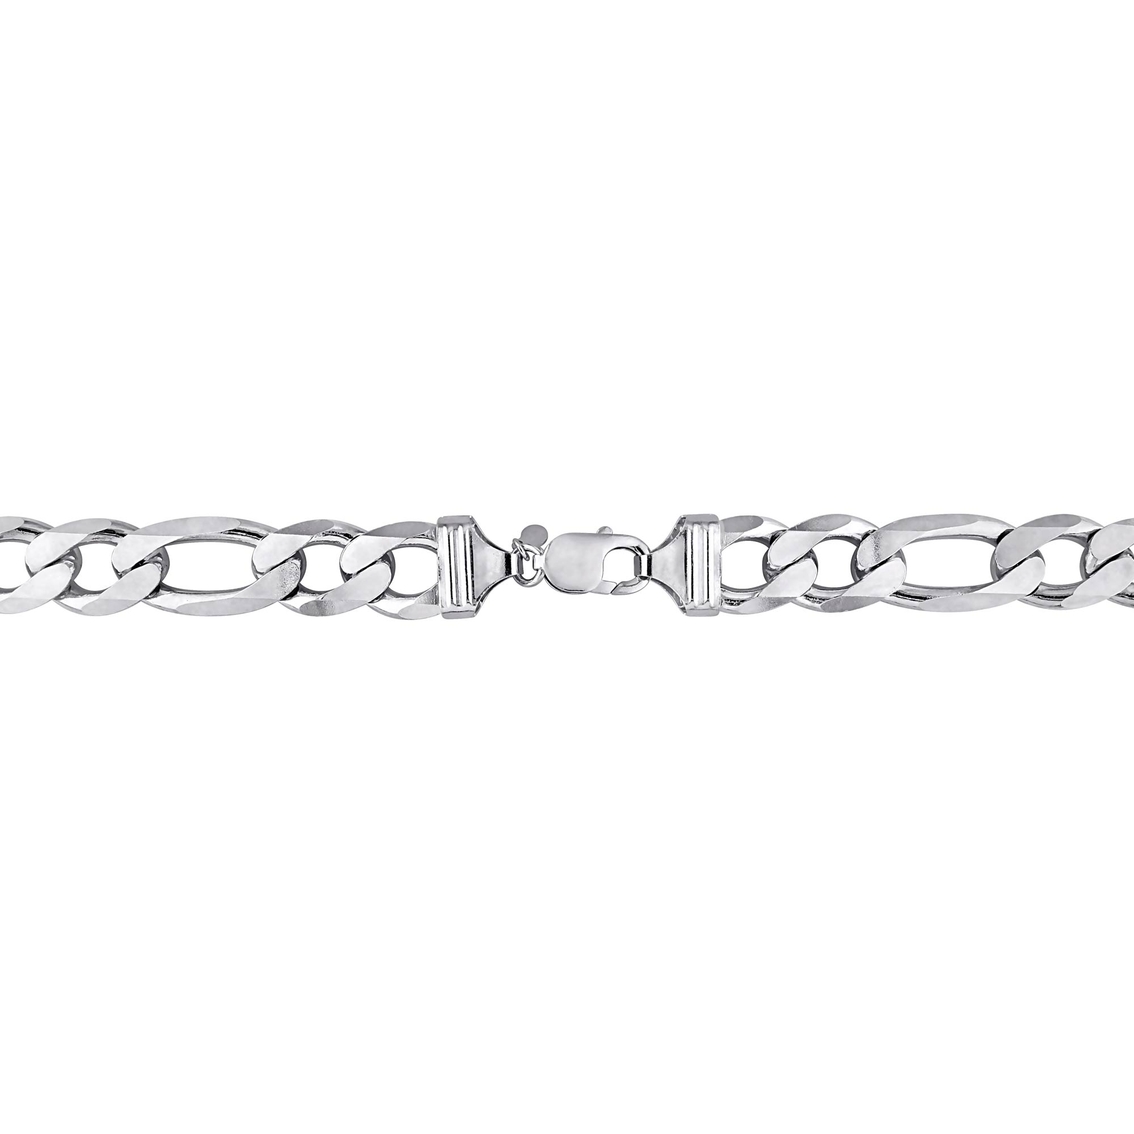 Sofia B. Sterling Silver 14.5mm Figaro Chain Necklace - Image 2 of 4